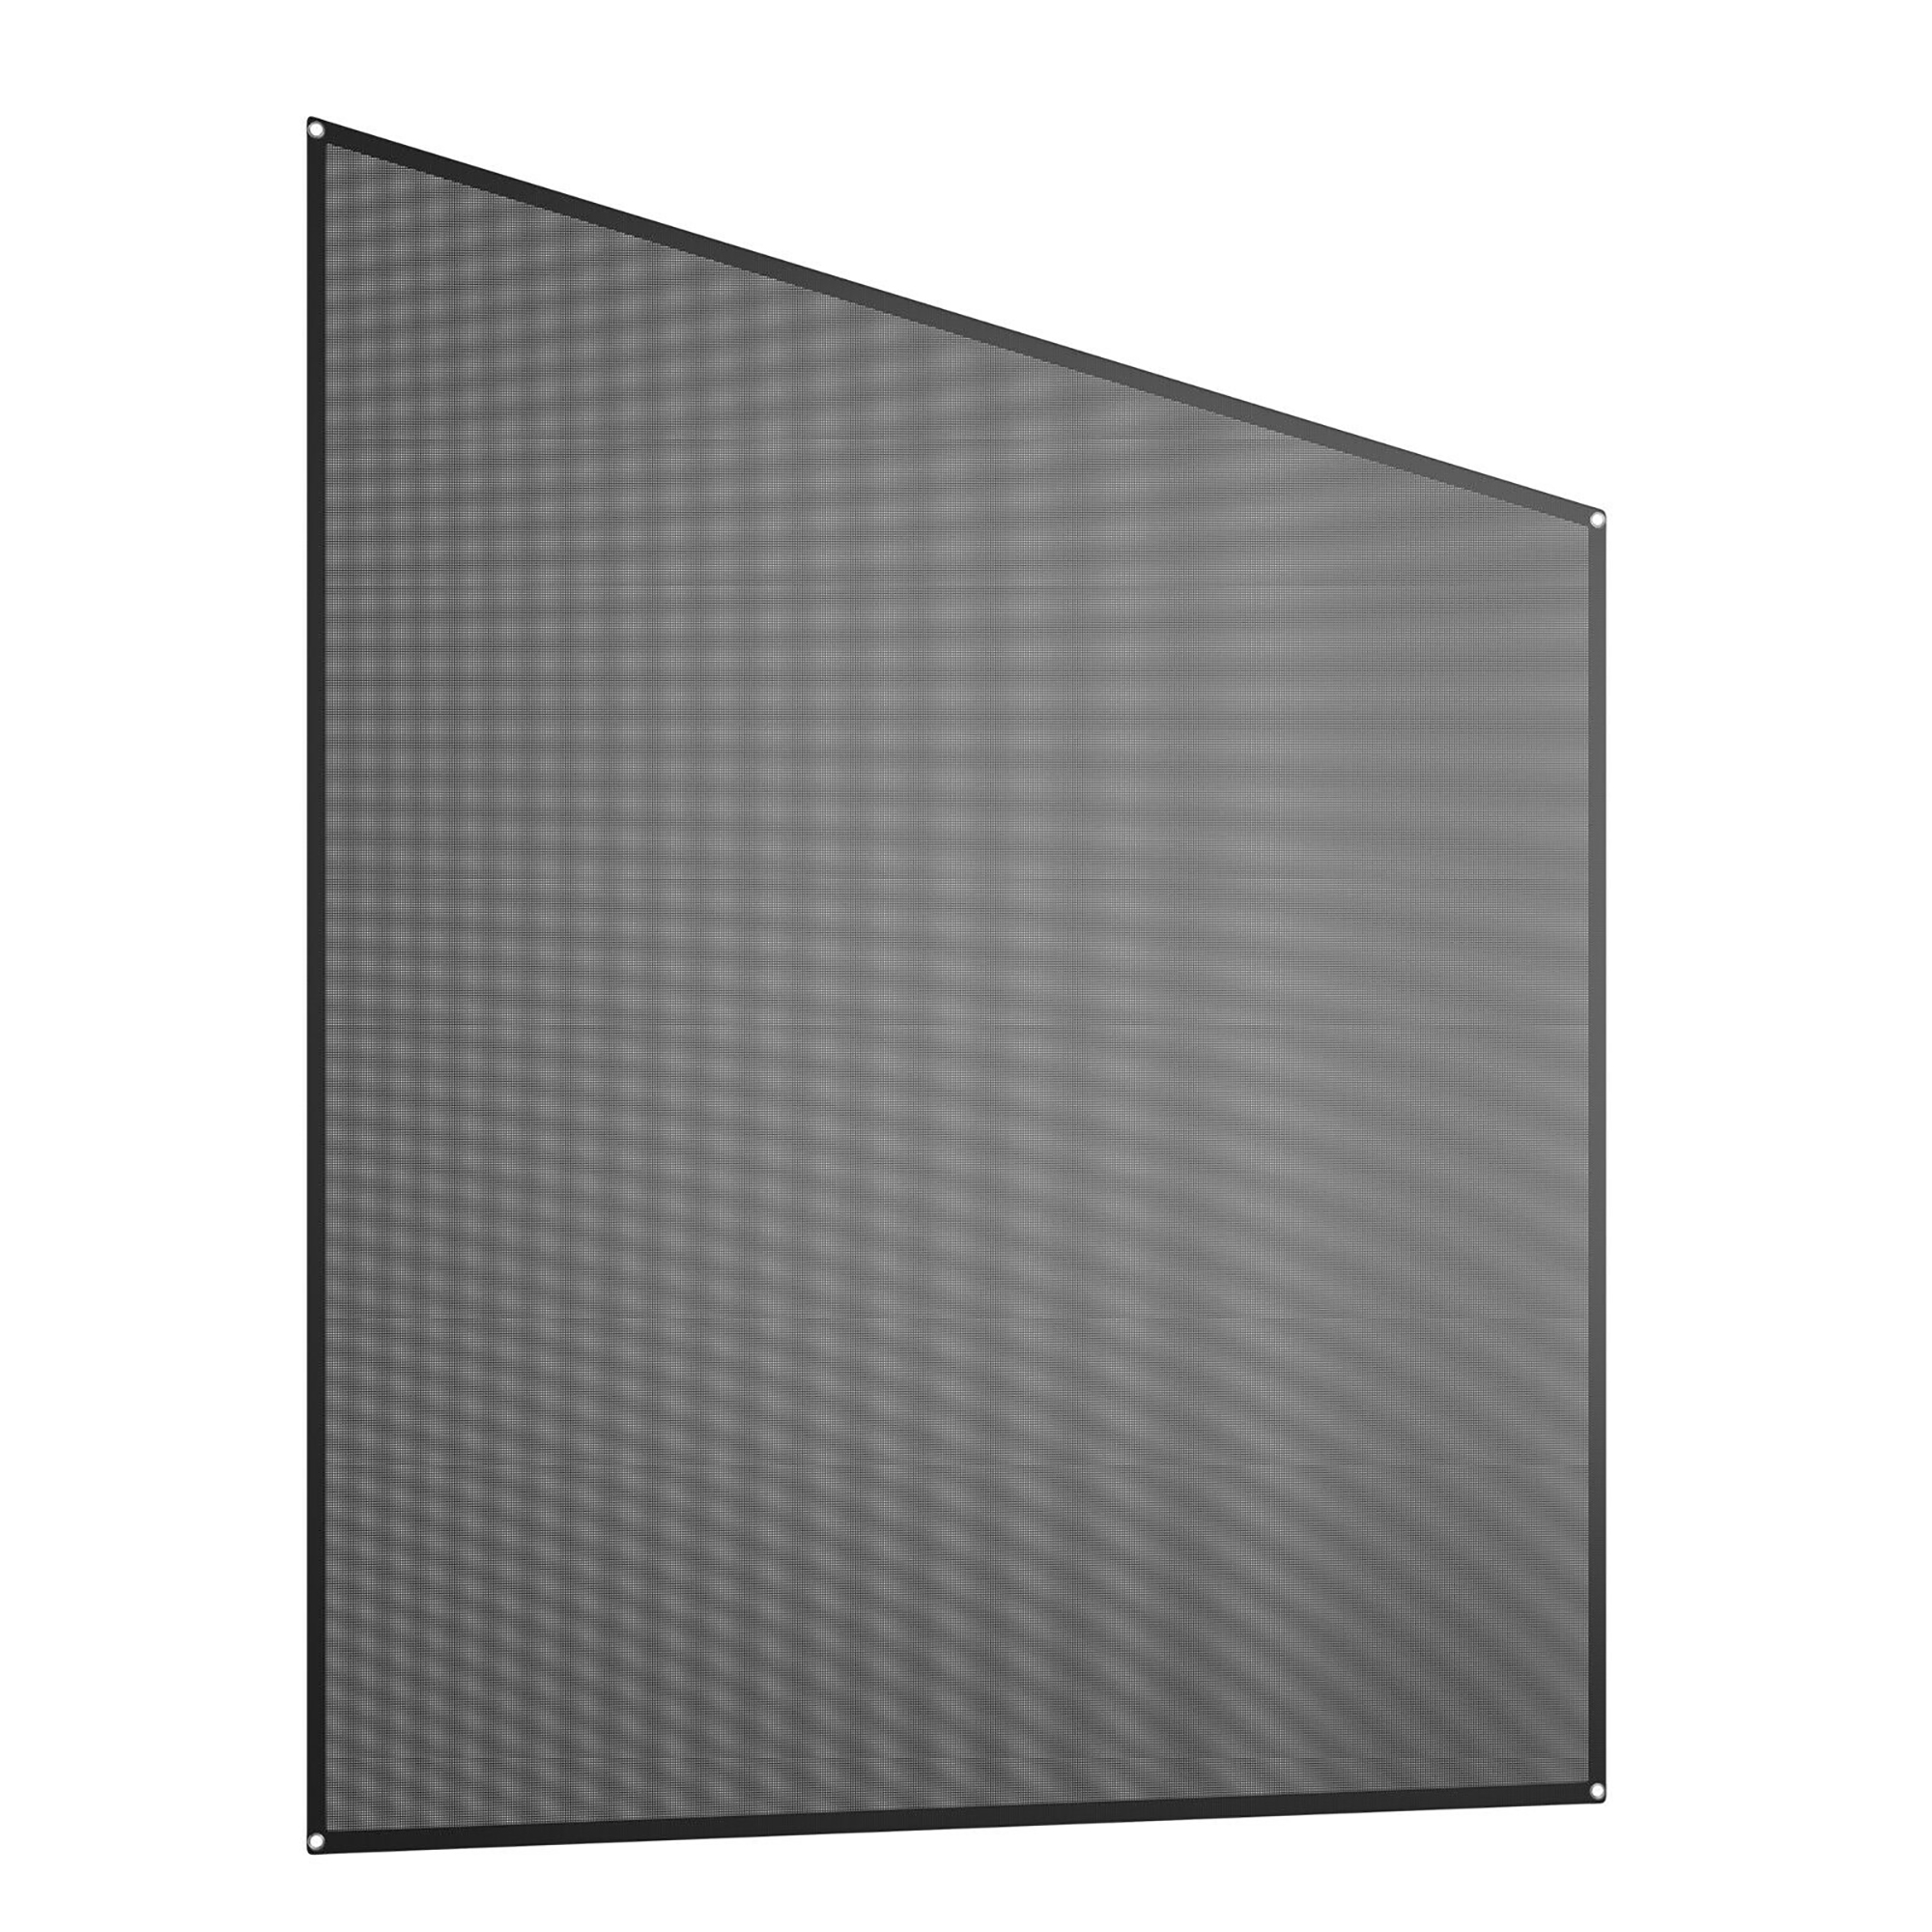 Costway Goplus 9' x 7'RV Awning Side Shade Black Mesh Screen Sunshade with Complete Kits